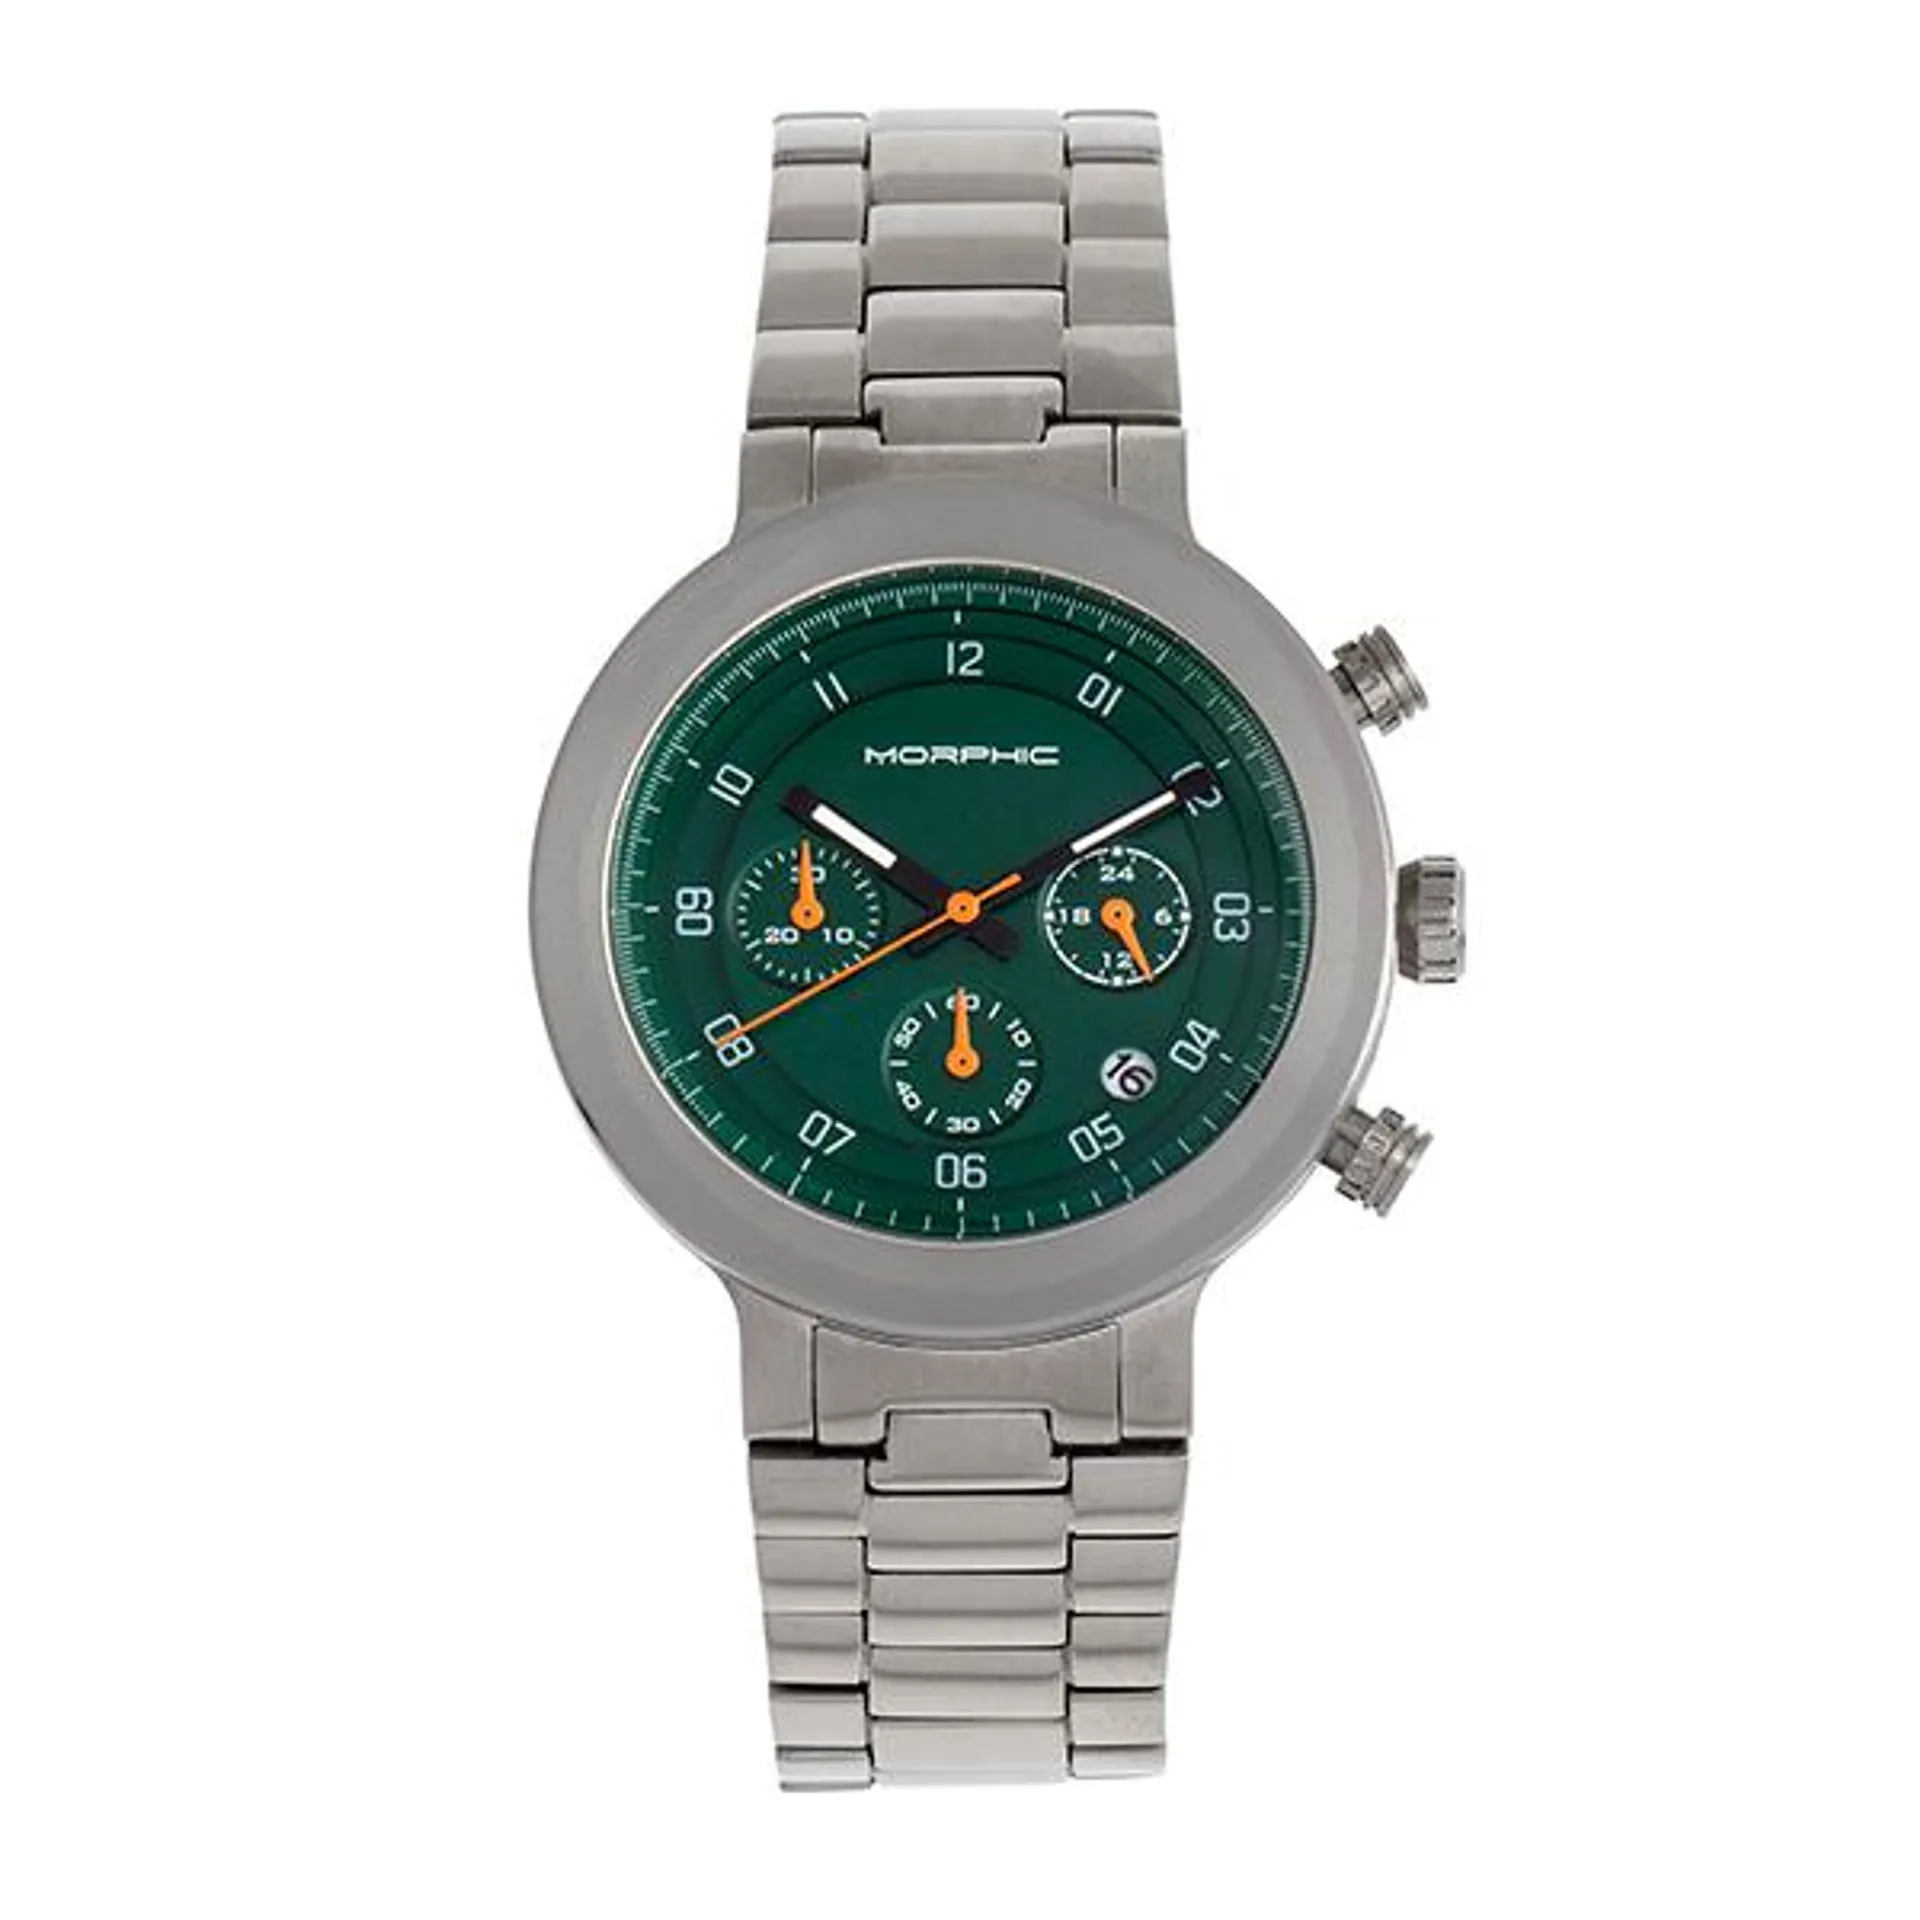 Morphic Gents M78 Series Watch with Stainless Steel Bracelet